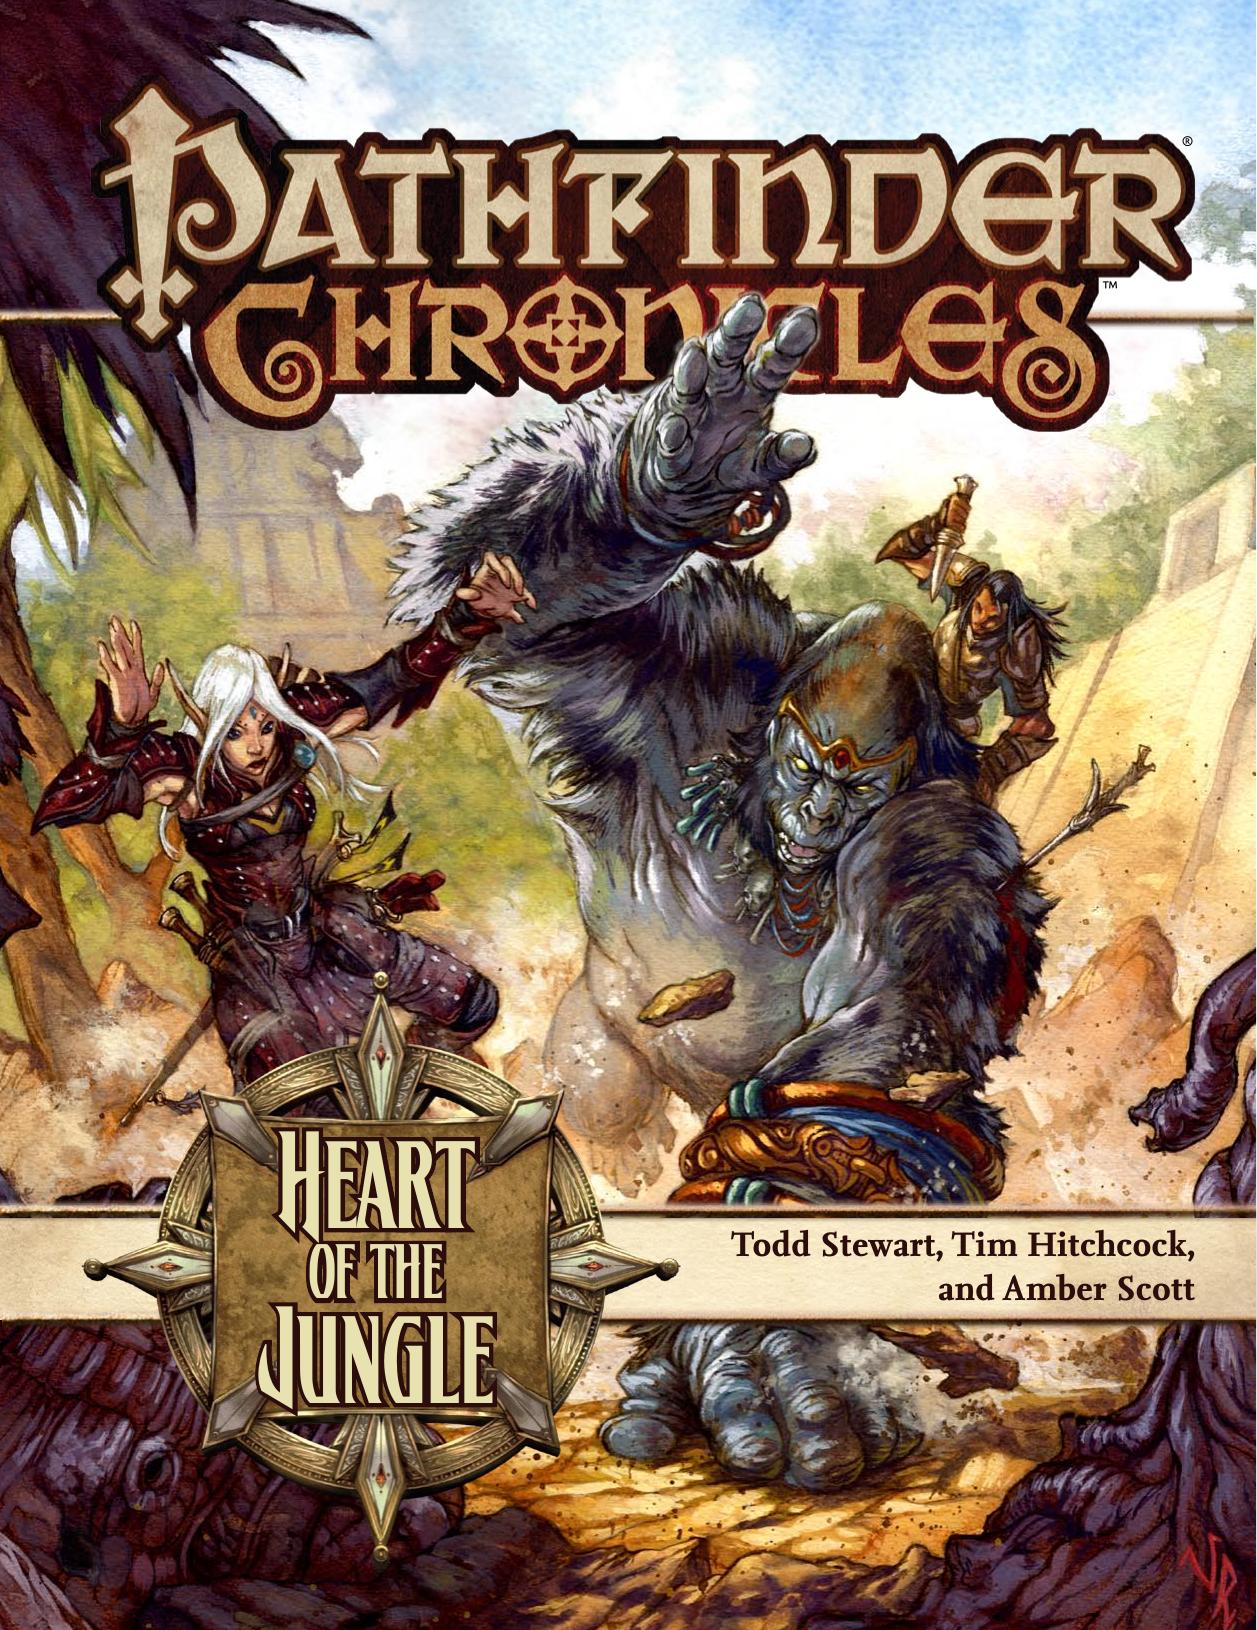 Pathfinder Chronicles: Heart of the Jungle